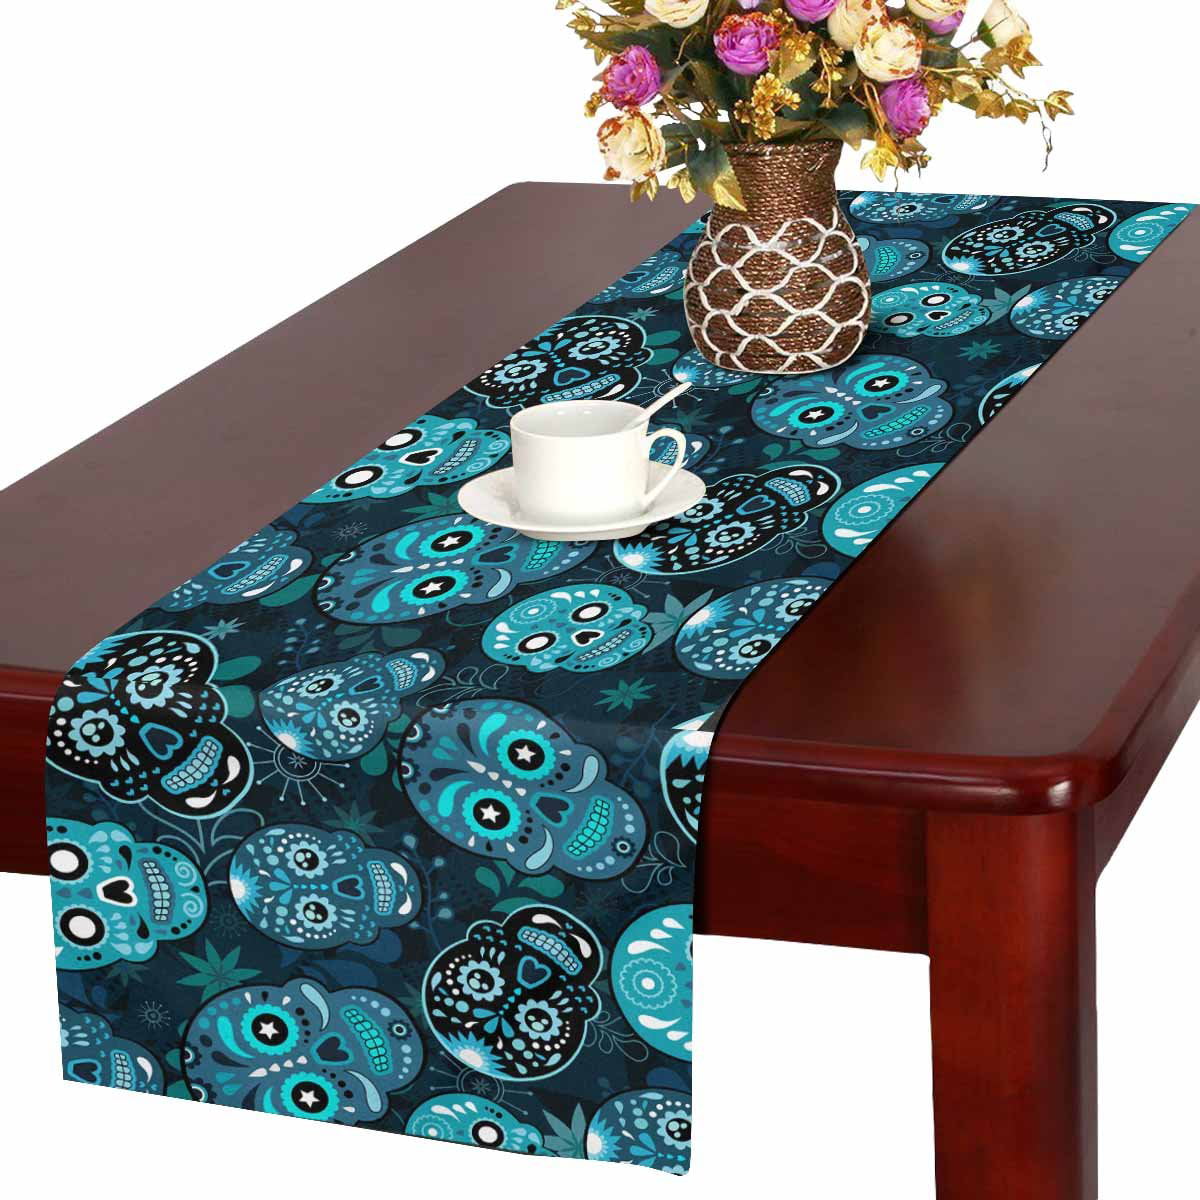 Halloween Sugar Skull Flower Floral Tablecloth Washable Polyester Table Cover for Buffet Table Home Kitchen Party Decoration AUUXVA Round Table Cloth